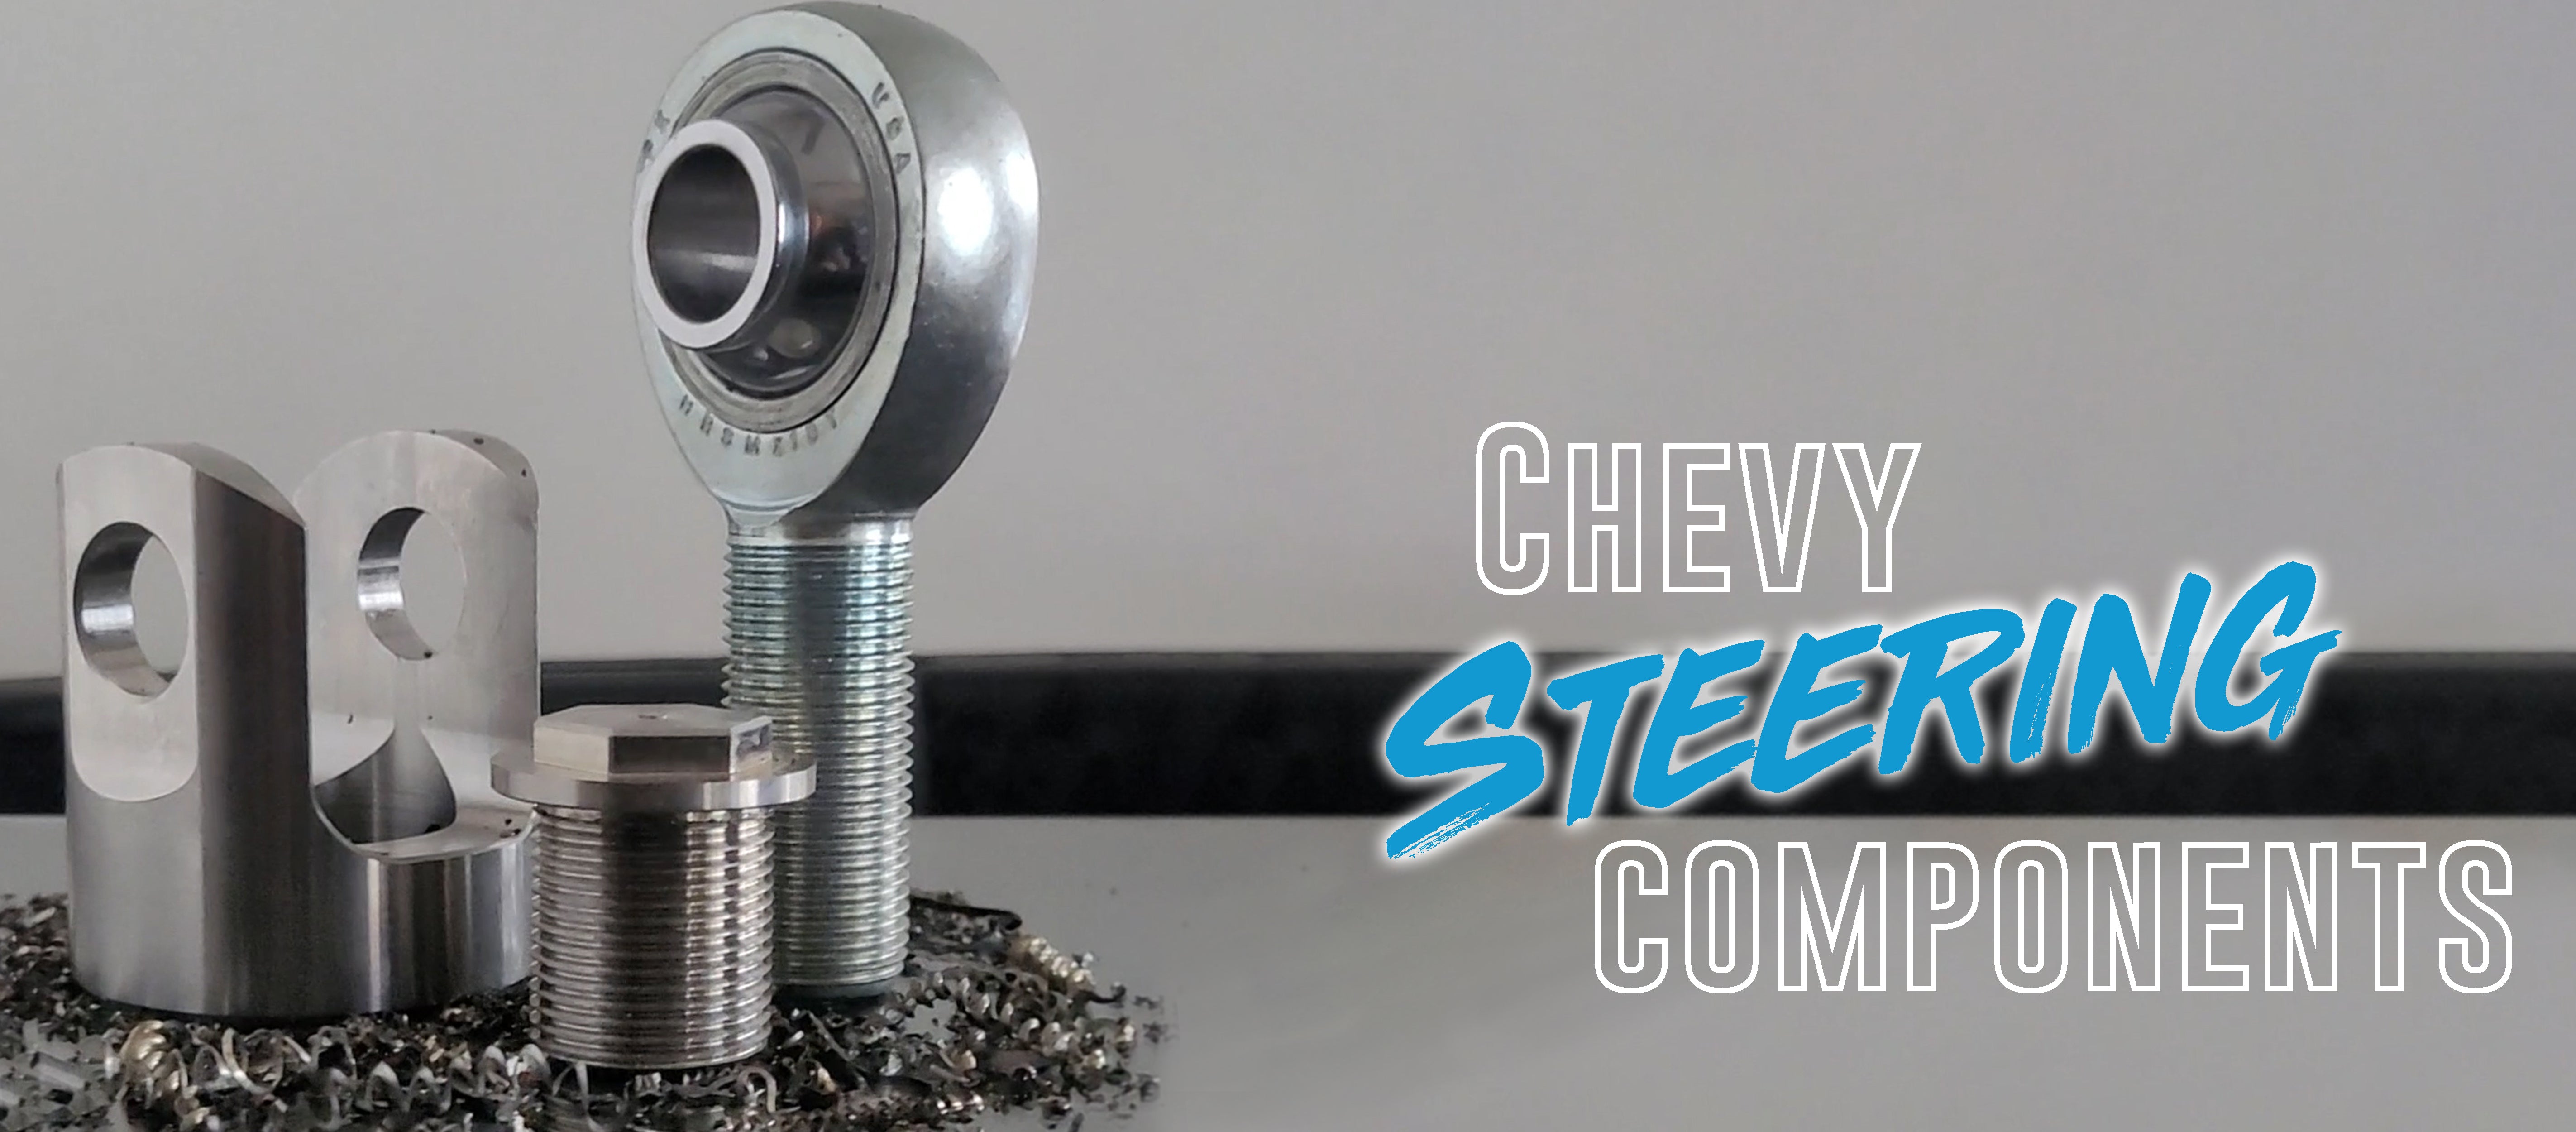 Chevy steering banner